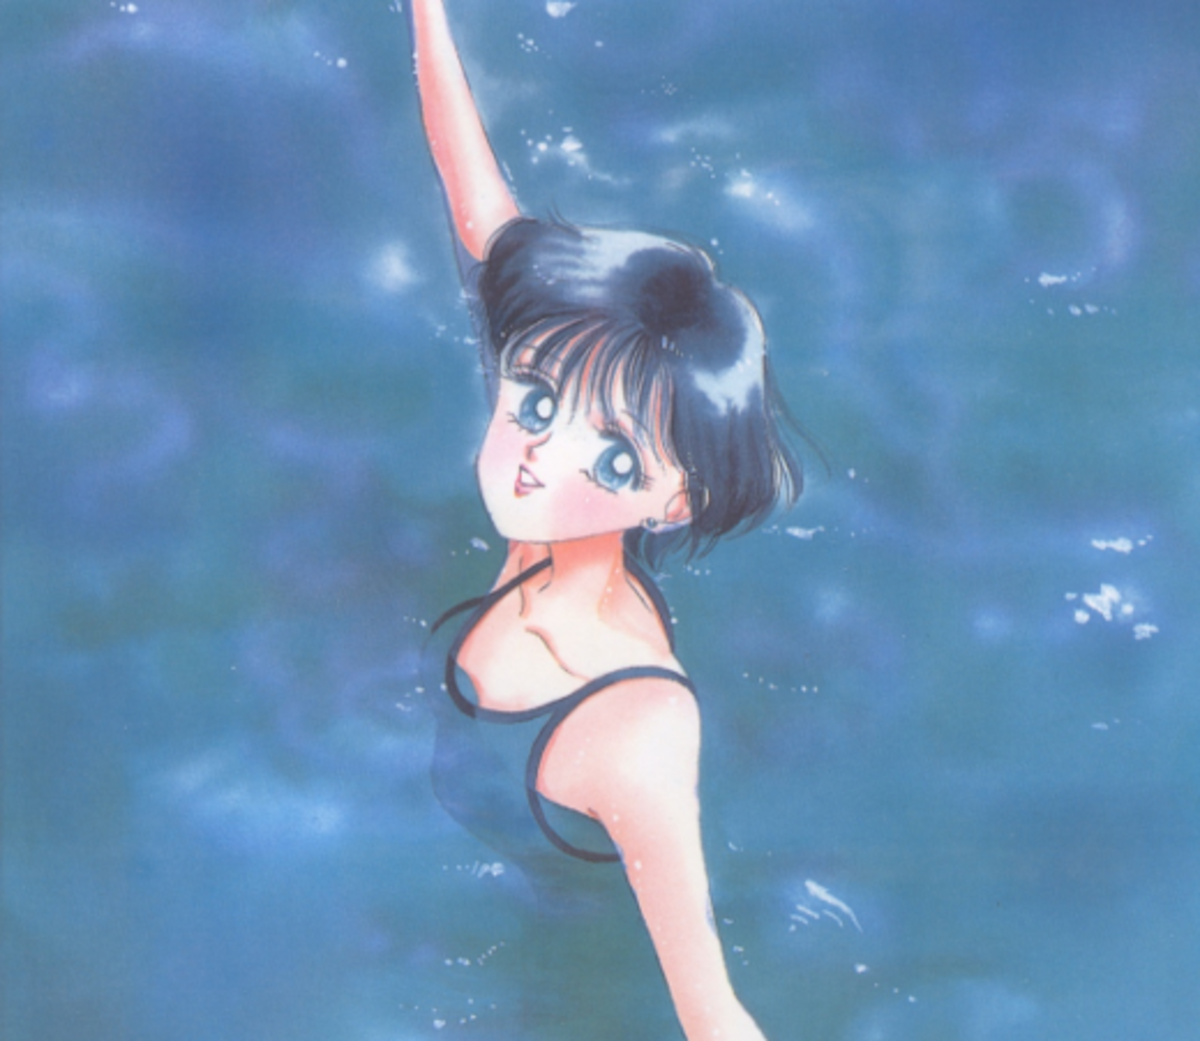 Ami Mizuno, also known as Sailor Mercury, is a 14-year-old girl genius who will appear in Act 2. She'll also collect other titles, such as the Soldier of Water and Wisdom.